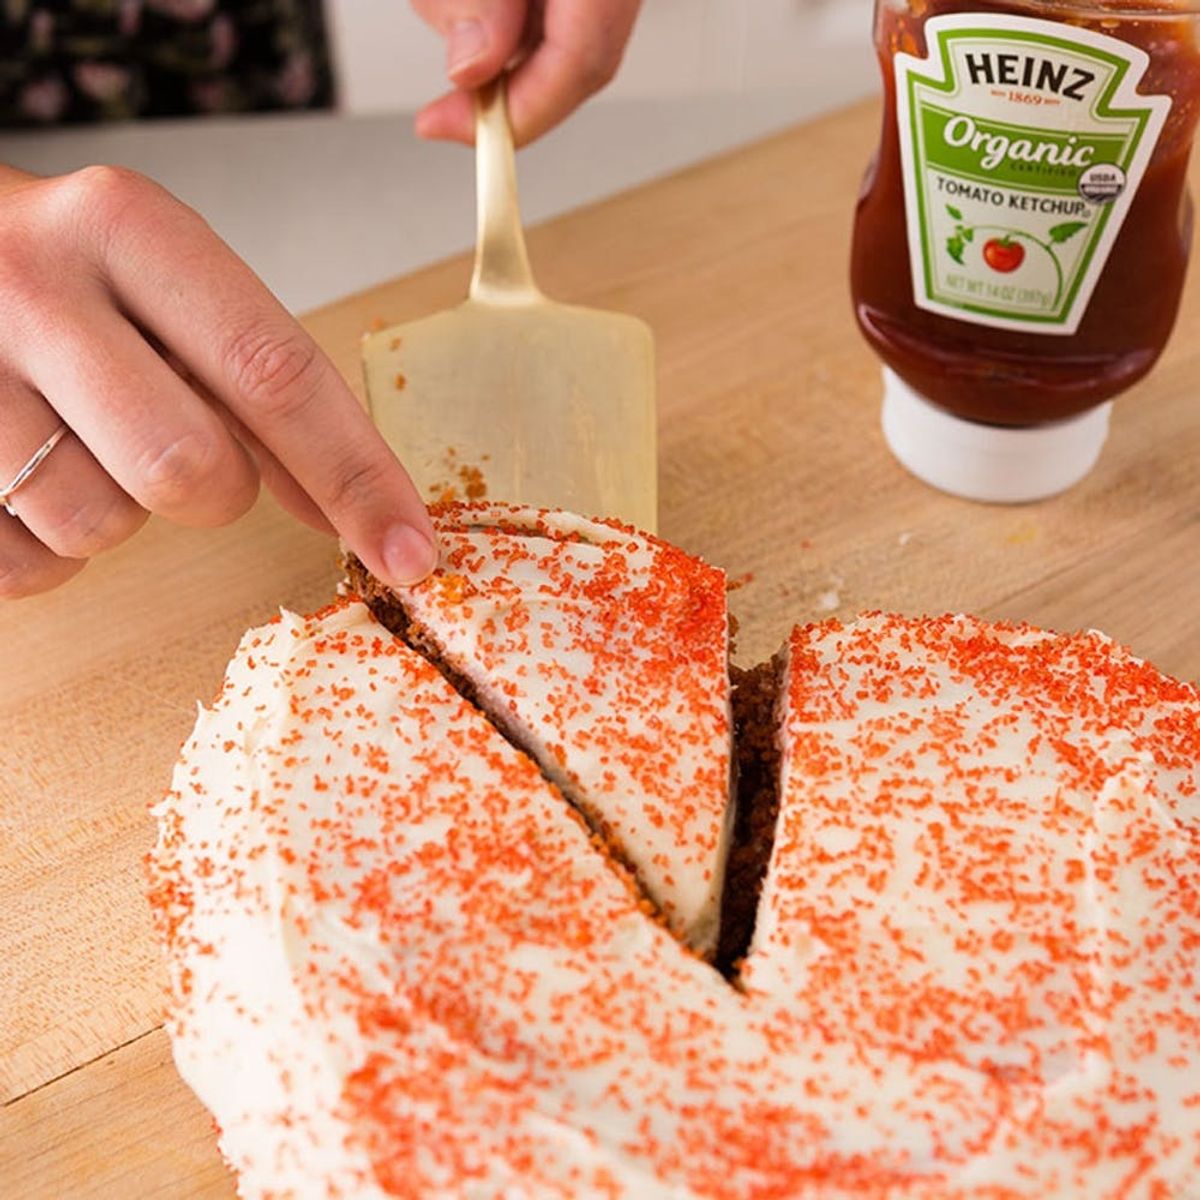 Is Ketchup Cake the New Red Velvet? We Tried the Viral Cake Recipe